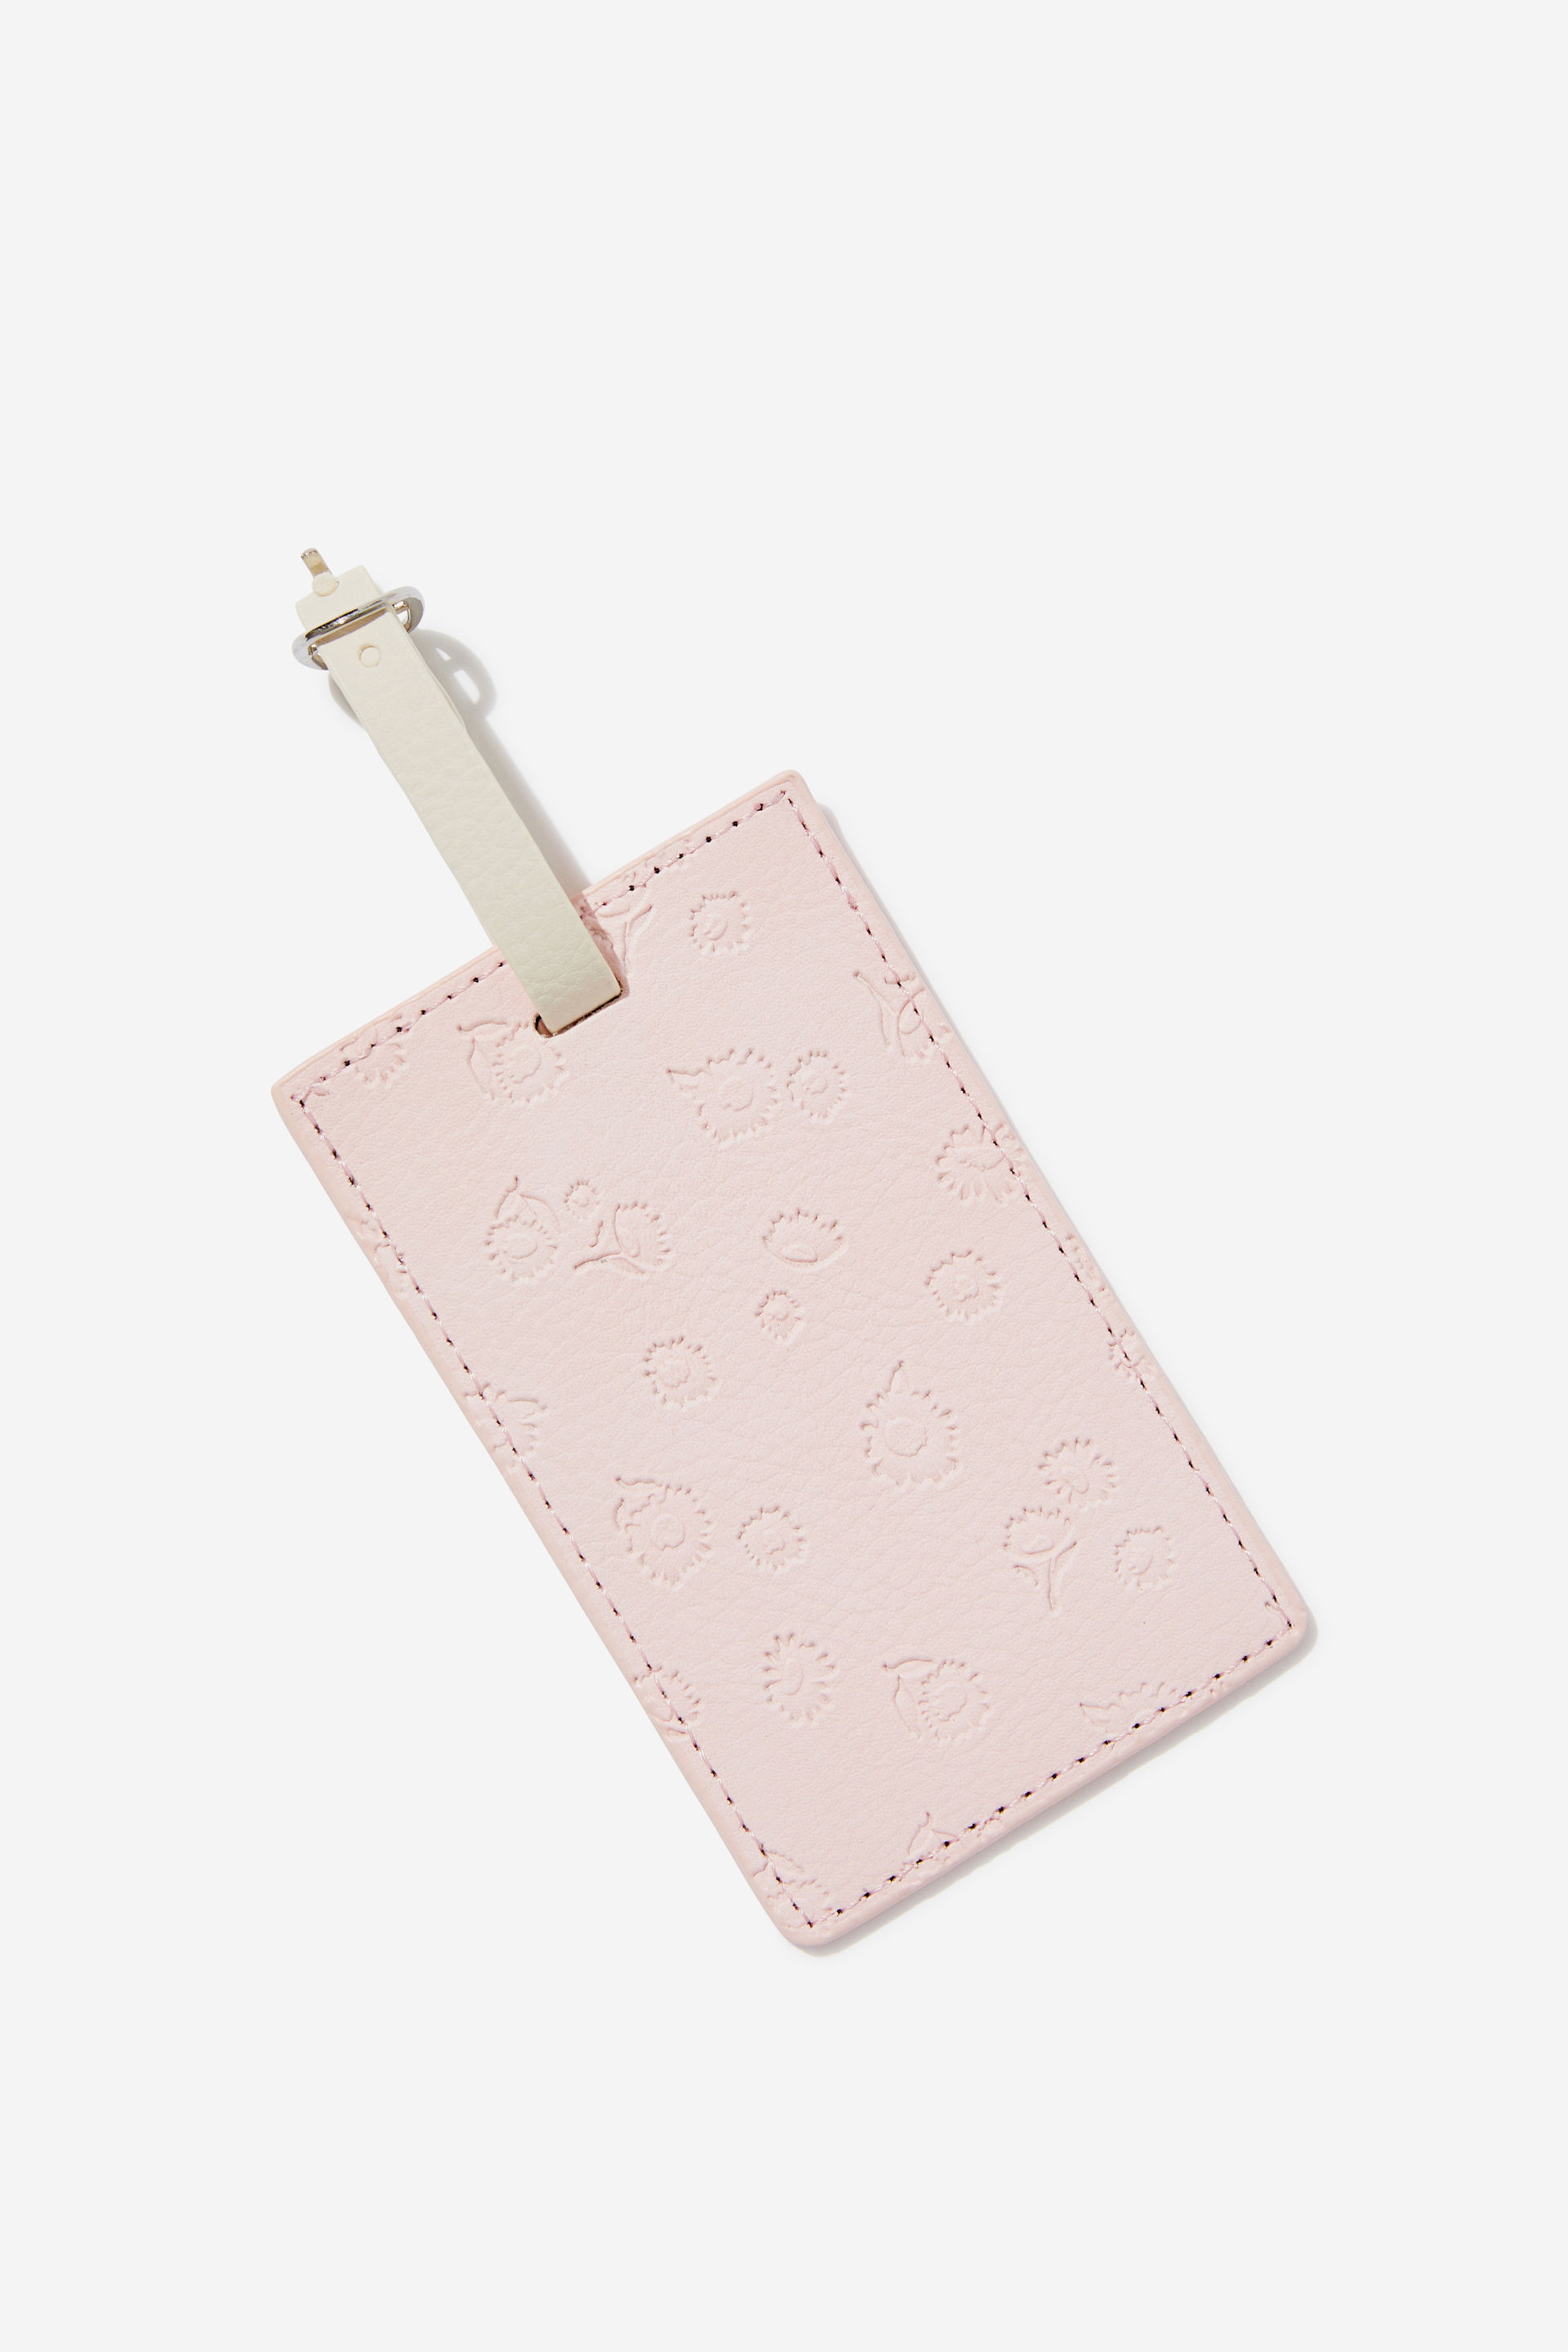 Typo - Off The Grid Luggage Tag - Daisy ditsy/ ballet blush deboss